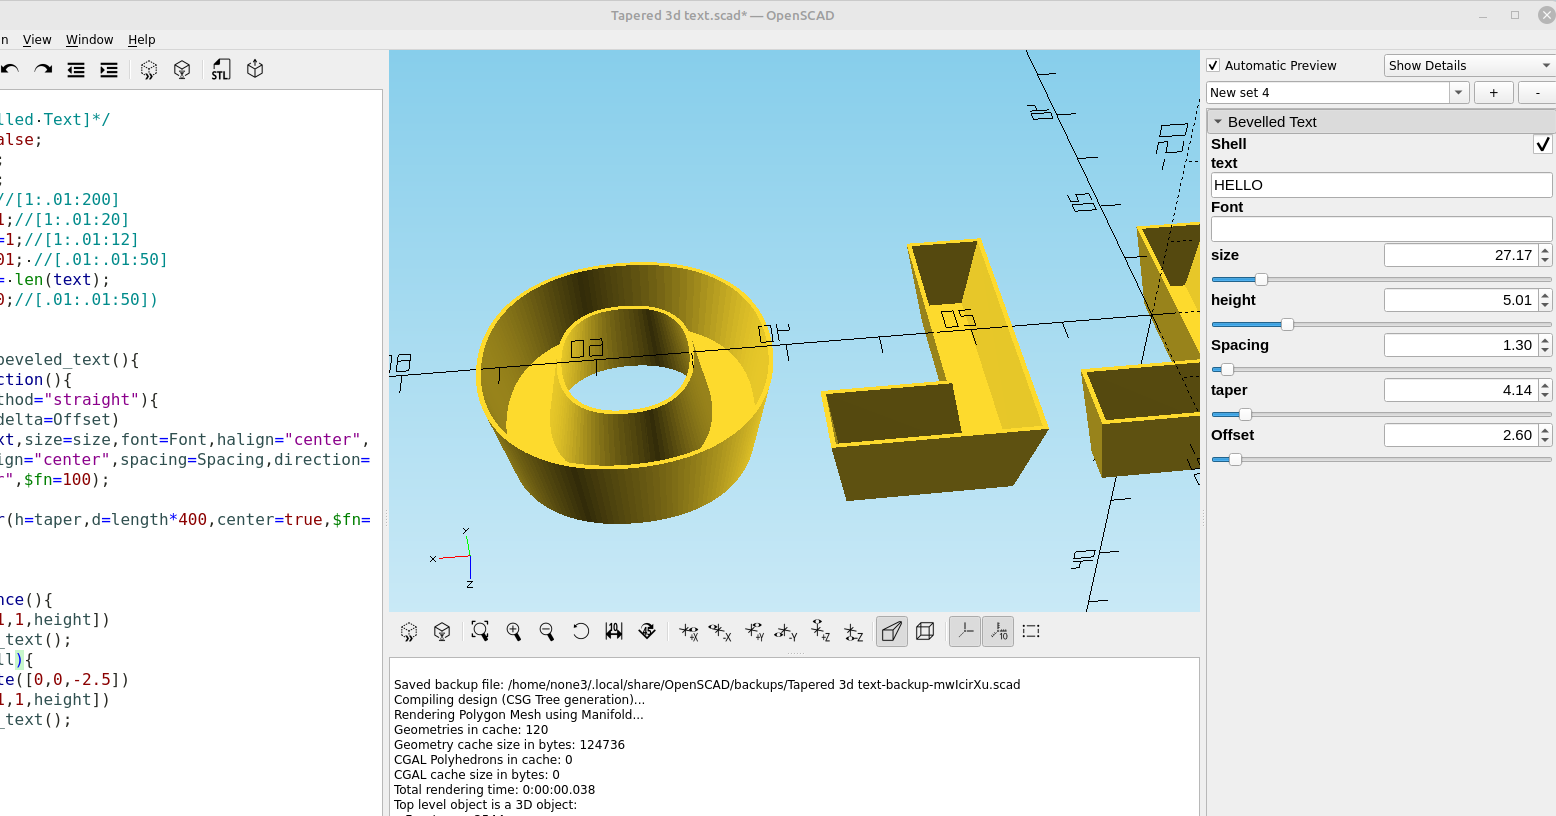 3D part design with OpenSCAD # 79: Adding shell to the tapered text module.